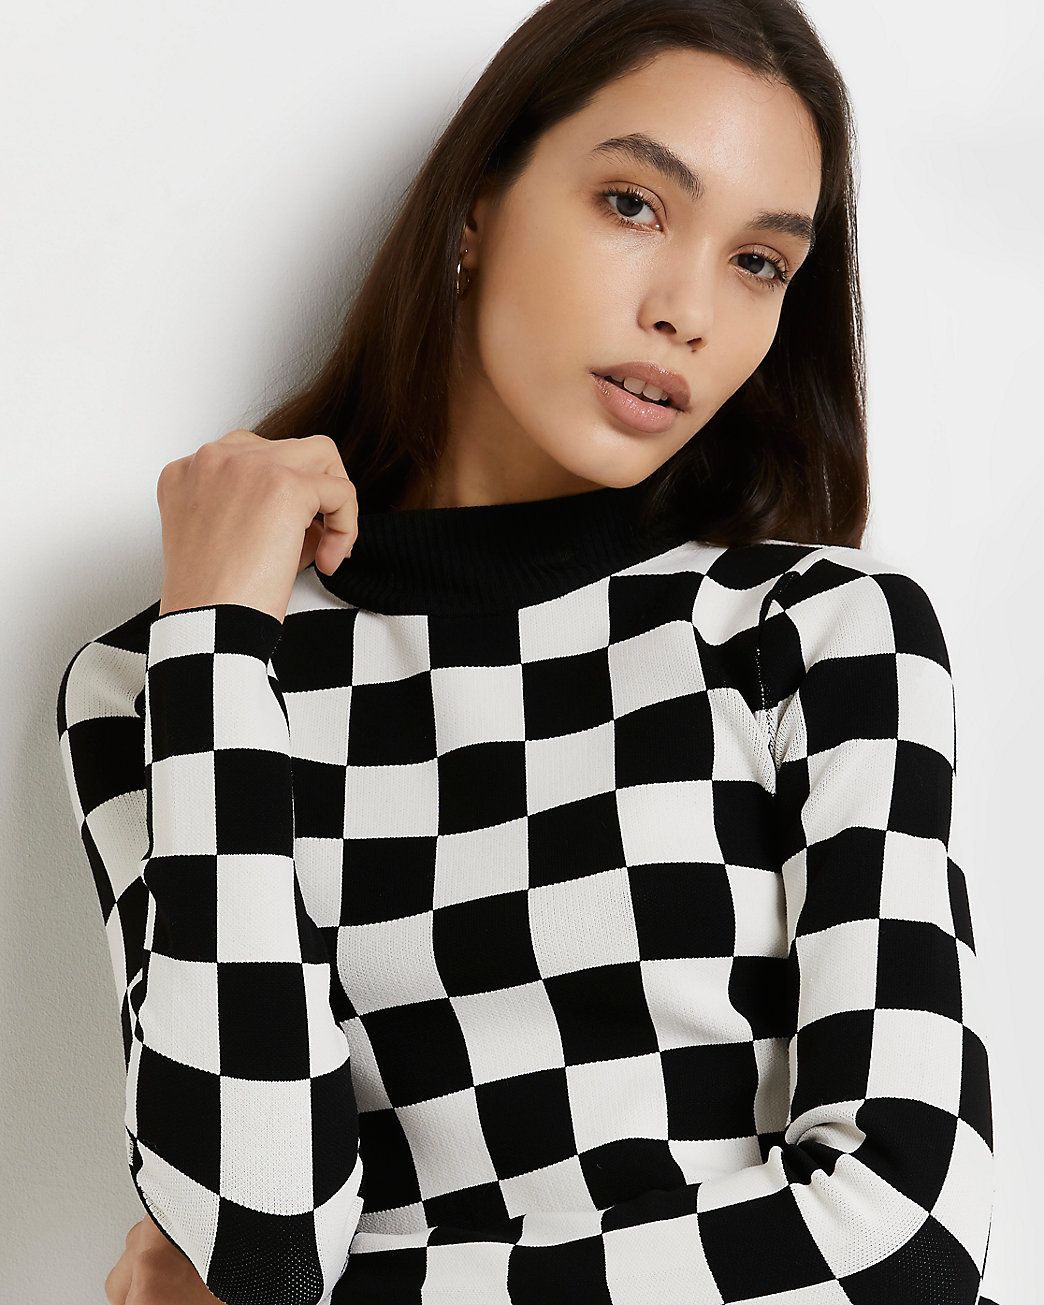 Emily's Checkered Top